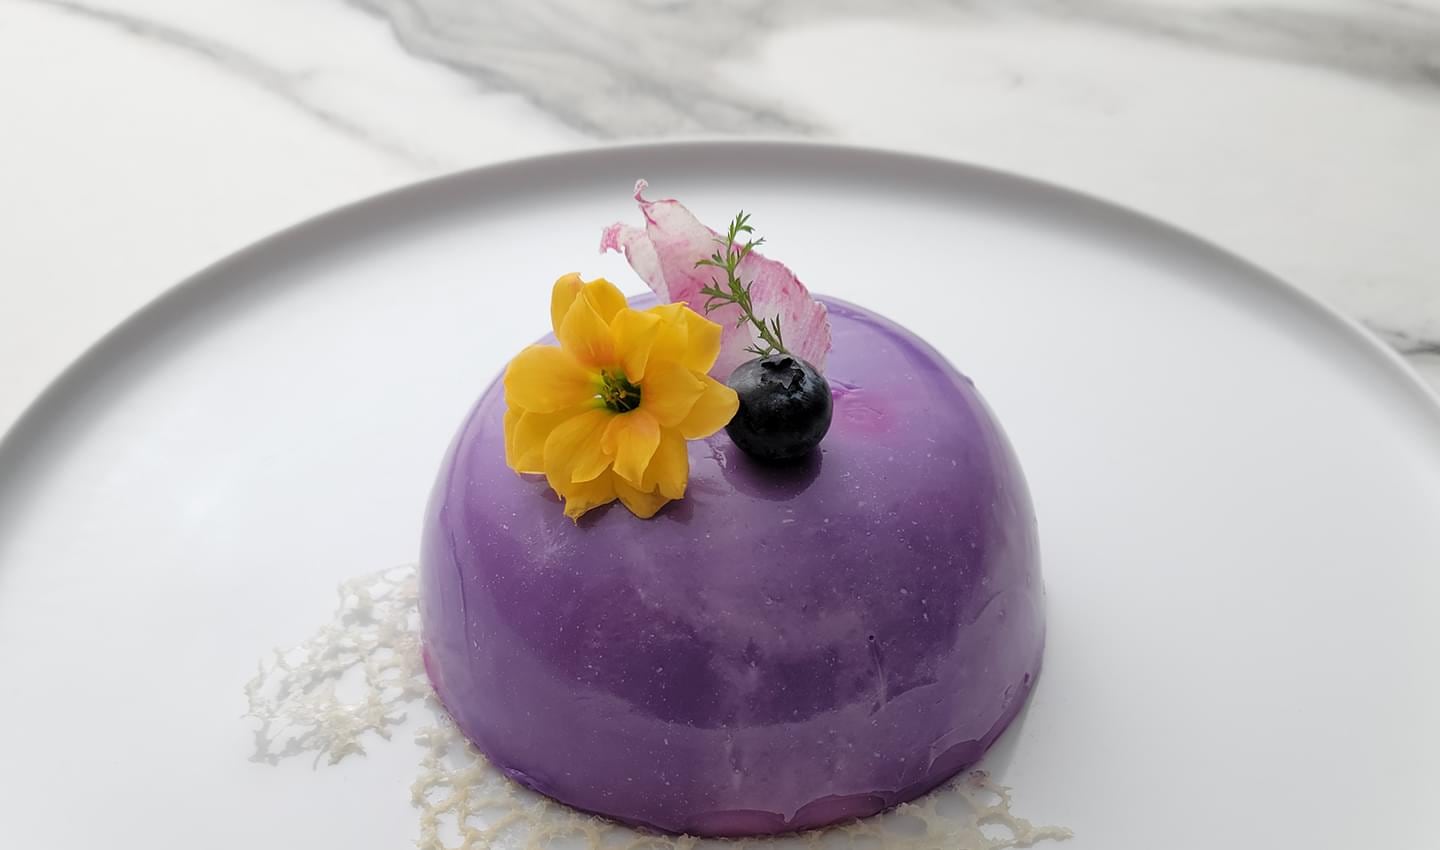 Camera zooms in on a plate of purple dessert with a yellow flower with gridlines overlayed, showing how you get high resolution images even when you crop.